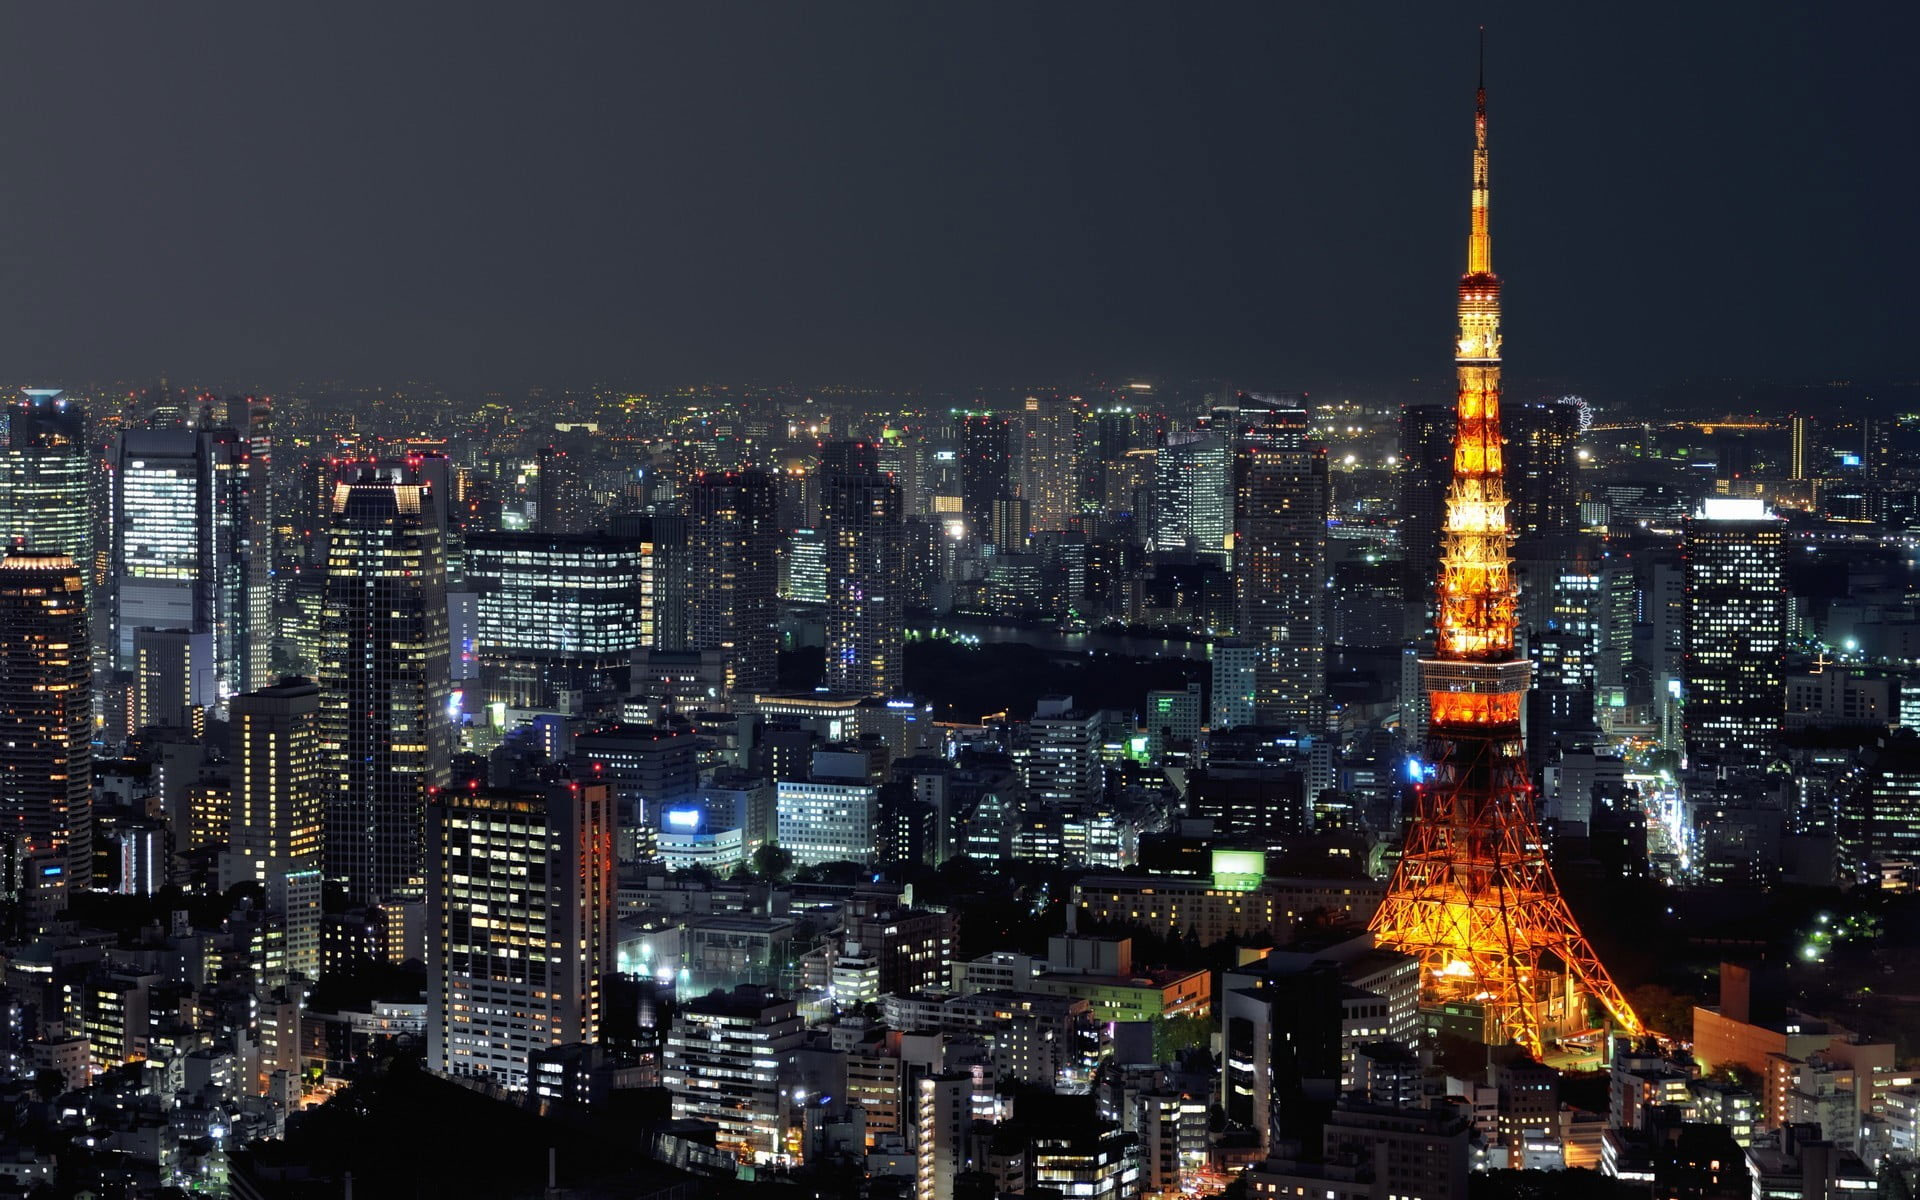 Tokyo Tower wallpaper, Japan, photography, cityscape, urban, building, night